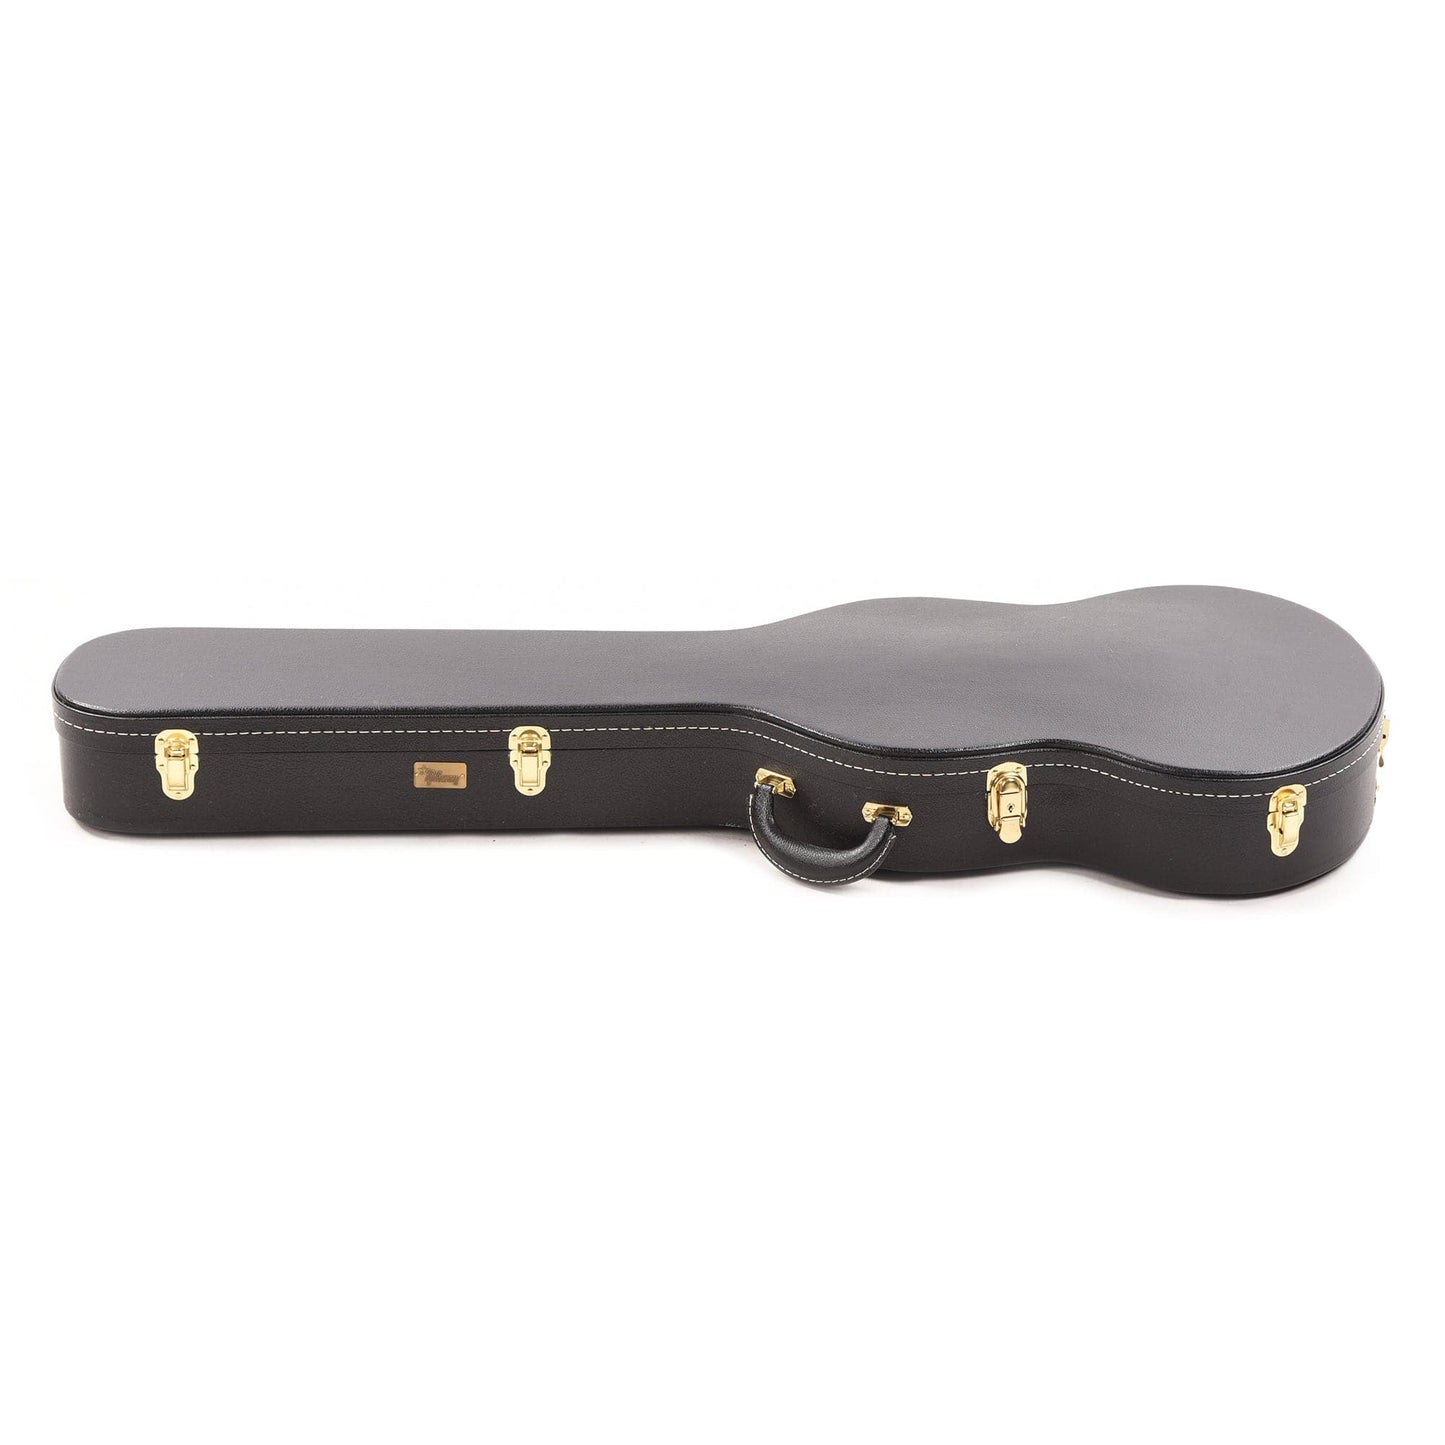 Lifton Historic SG Hardshell Case Black/Goldenrod Accessories / Cases and Gig Bags / Guitar Cases